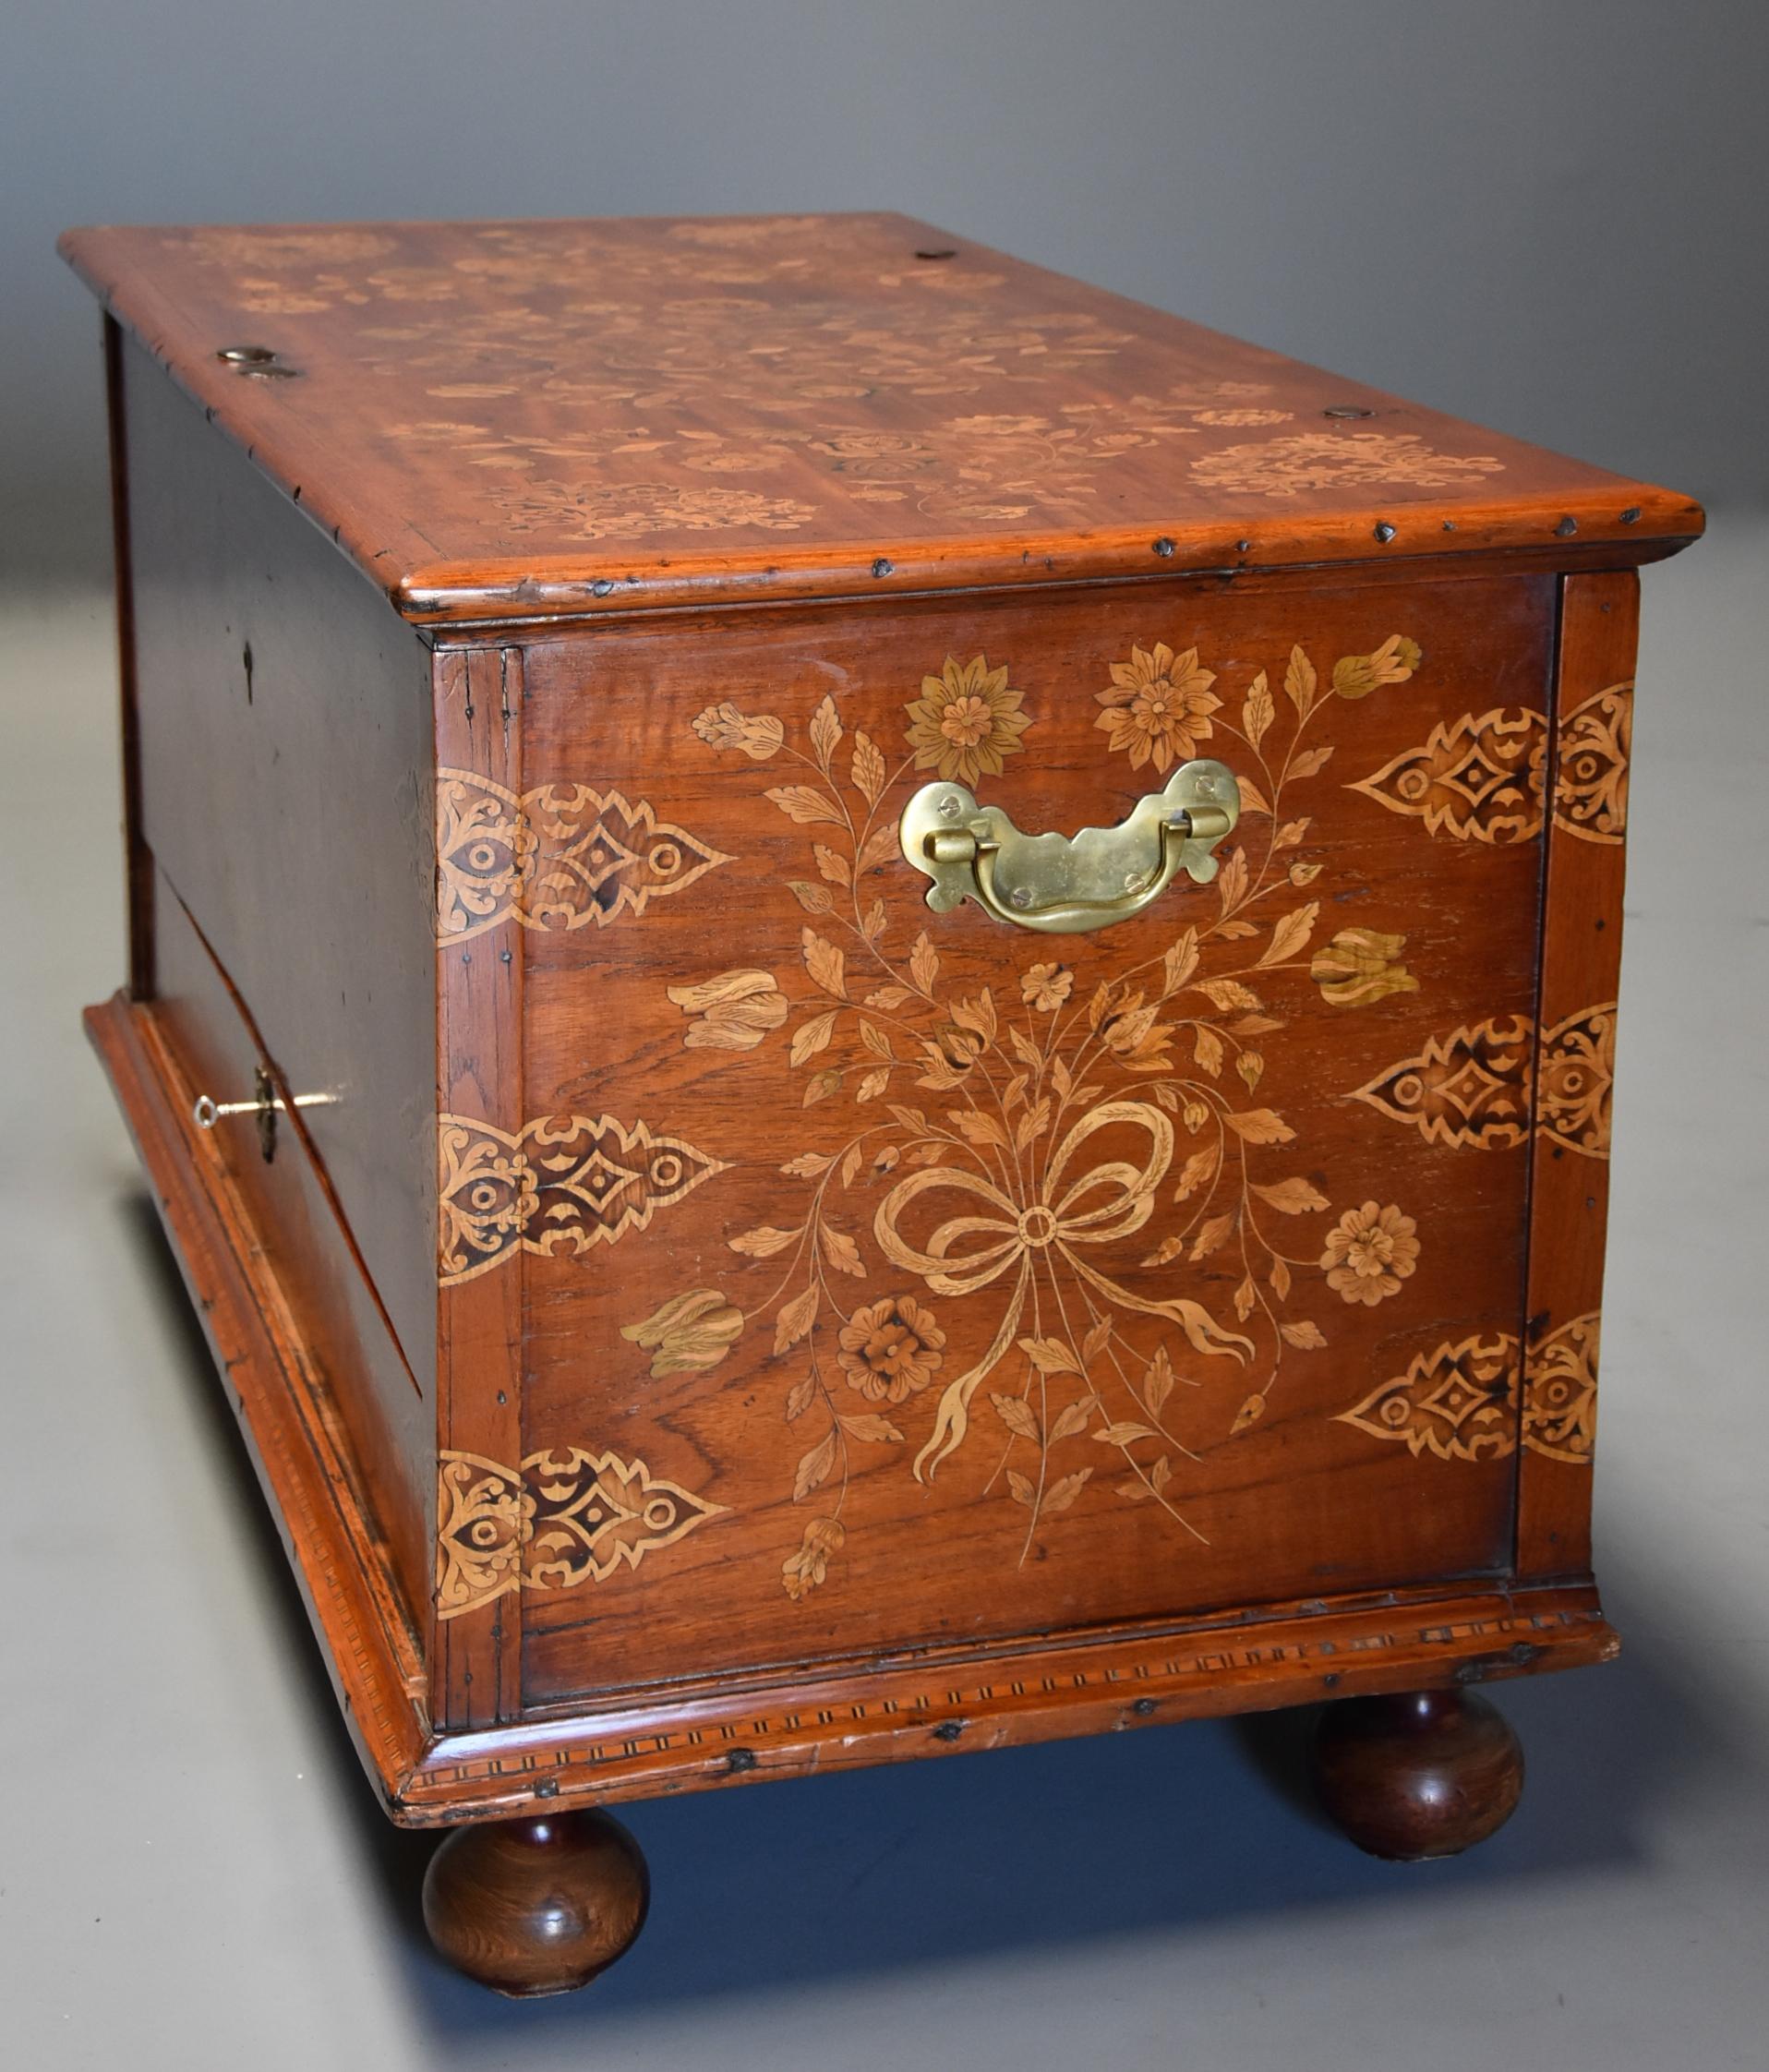 Rare Superb Quality Mid-19th Century Continental Floral Marquetry Teak Chest (Teakholz)